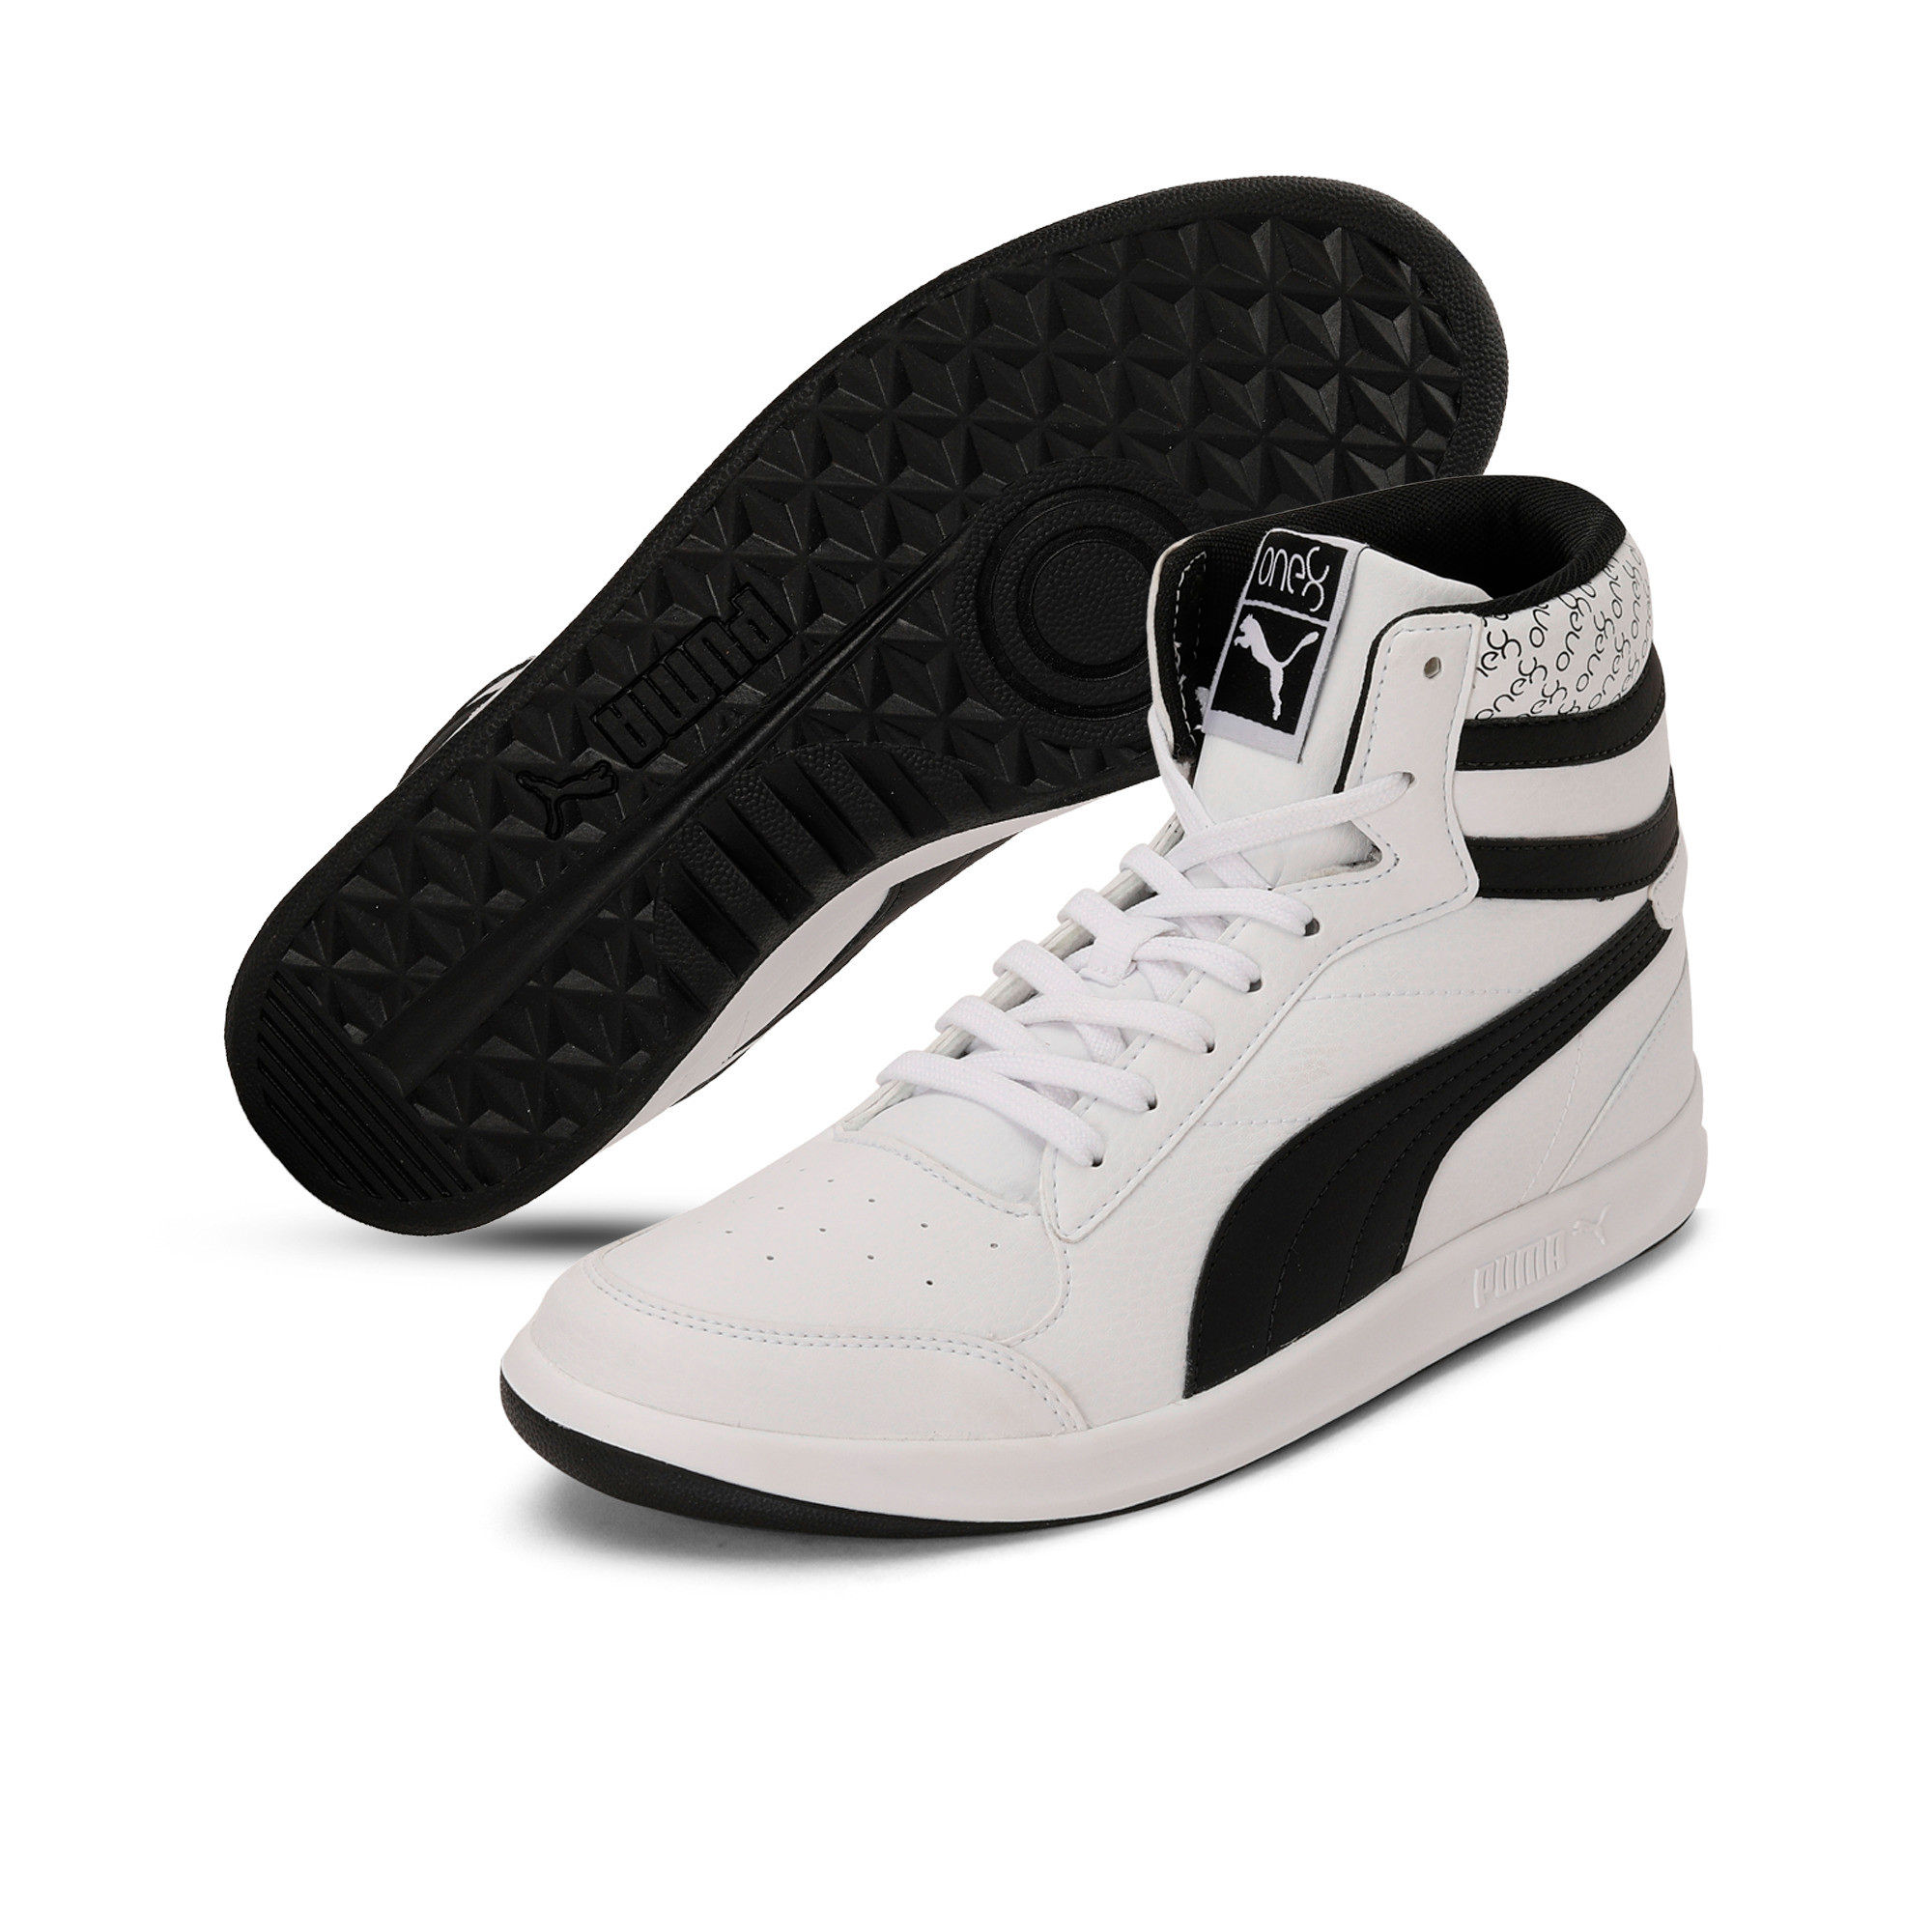 Puma One8 Mid V2 Idp Shoes: Buy Puma One8 Mid V2 Idp Shoes Online at ...